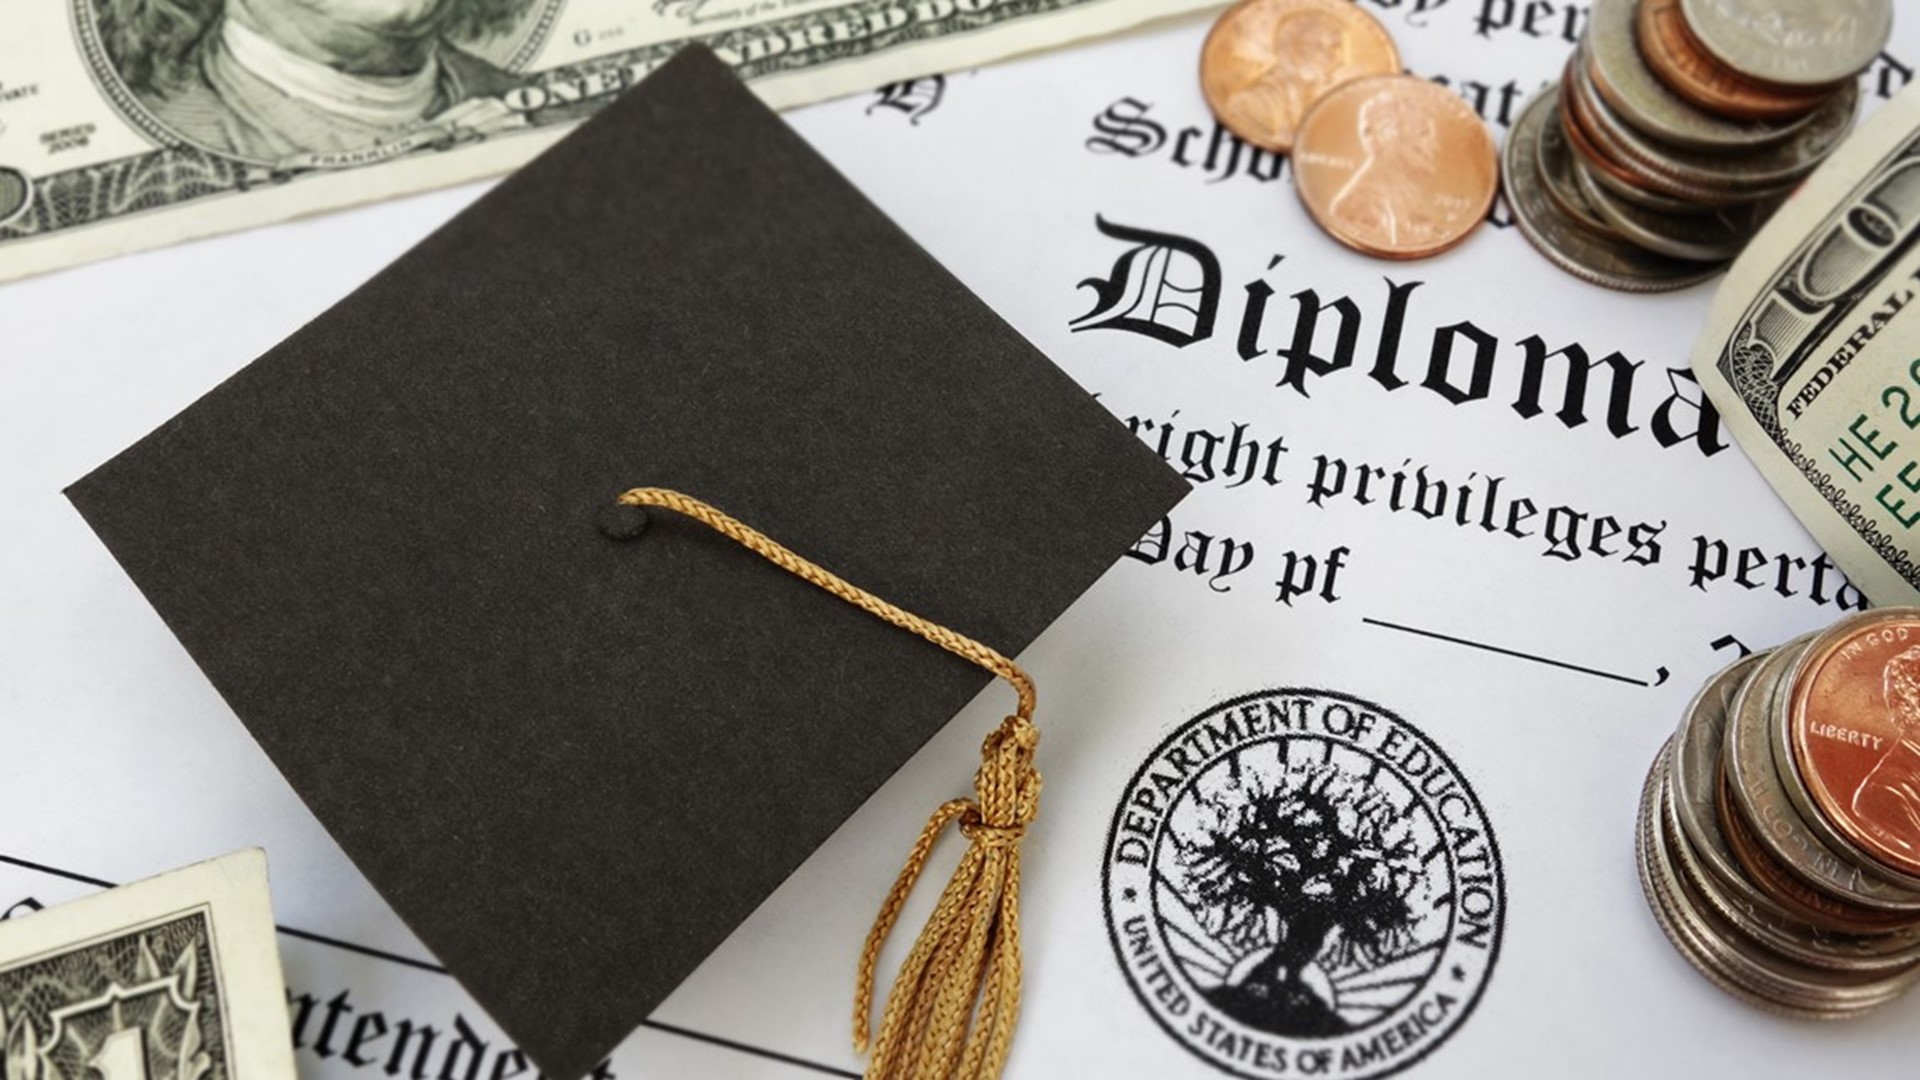 Millions of people could soon have their student debt wiped away as federal officials are making sweeping changes to the national loan forgiveness program.